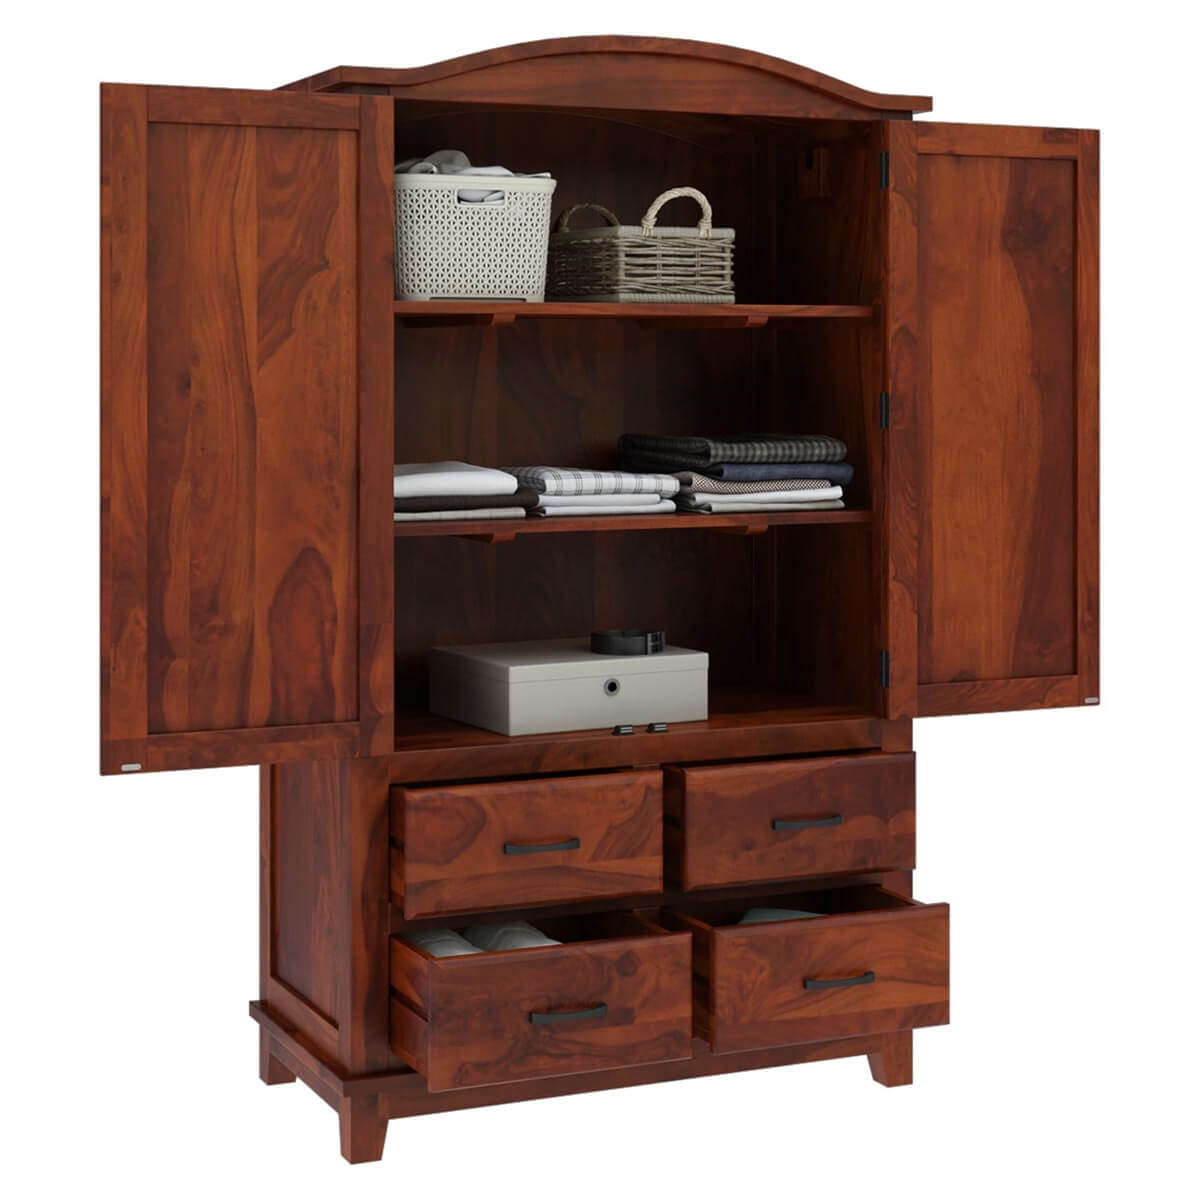 Royal Palace Wardrobe Solid Sheesham Wood Two Door With Four Drawers Drawers In Honey Oak Finish For Bedroom Furniture